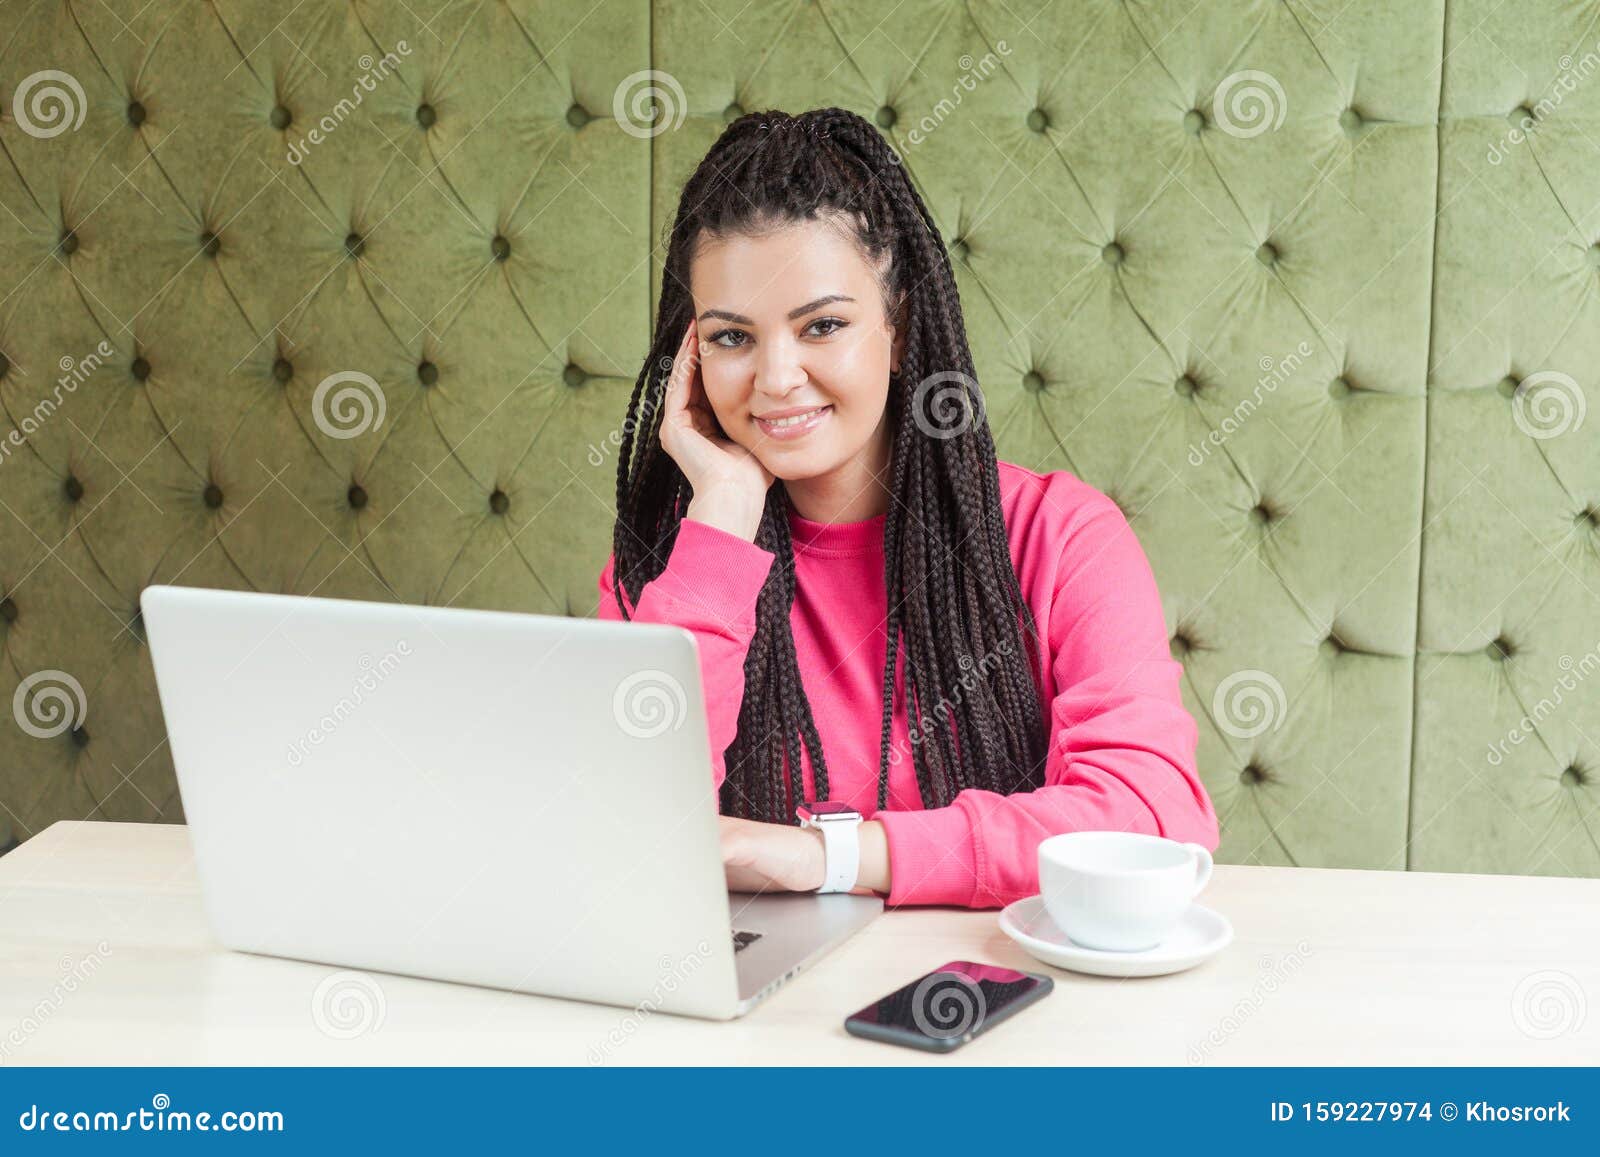 Satisfied Young Girl Freelancer With Black Dreadlocks